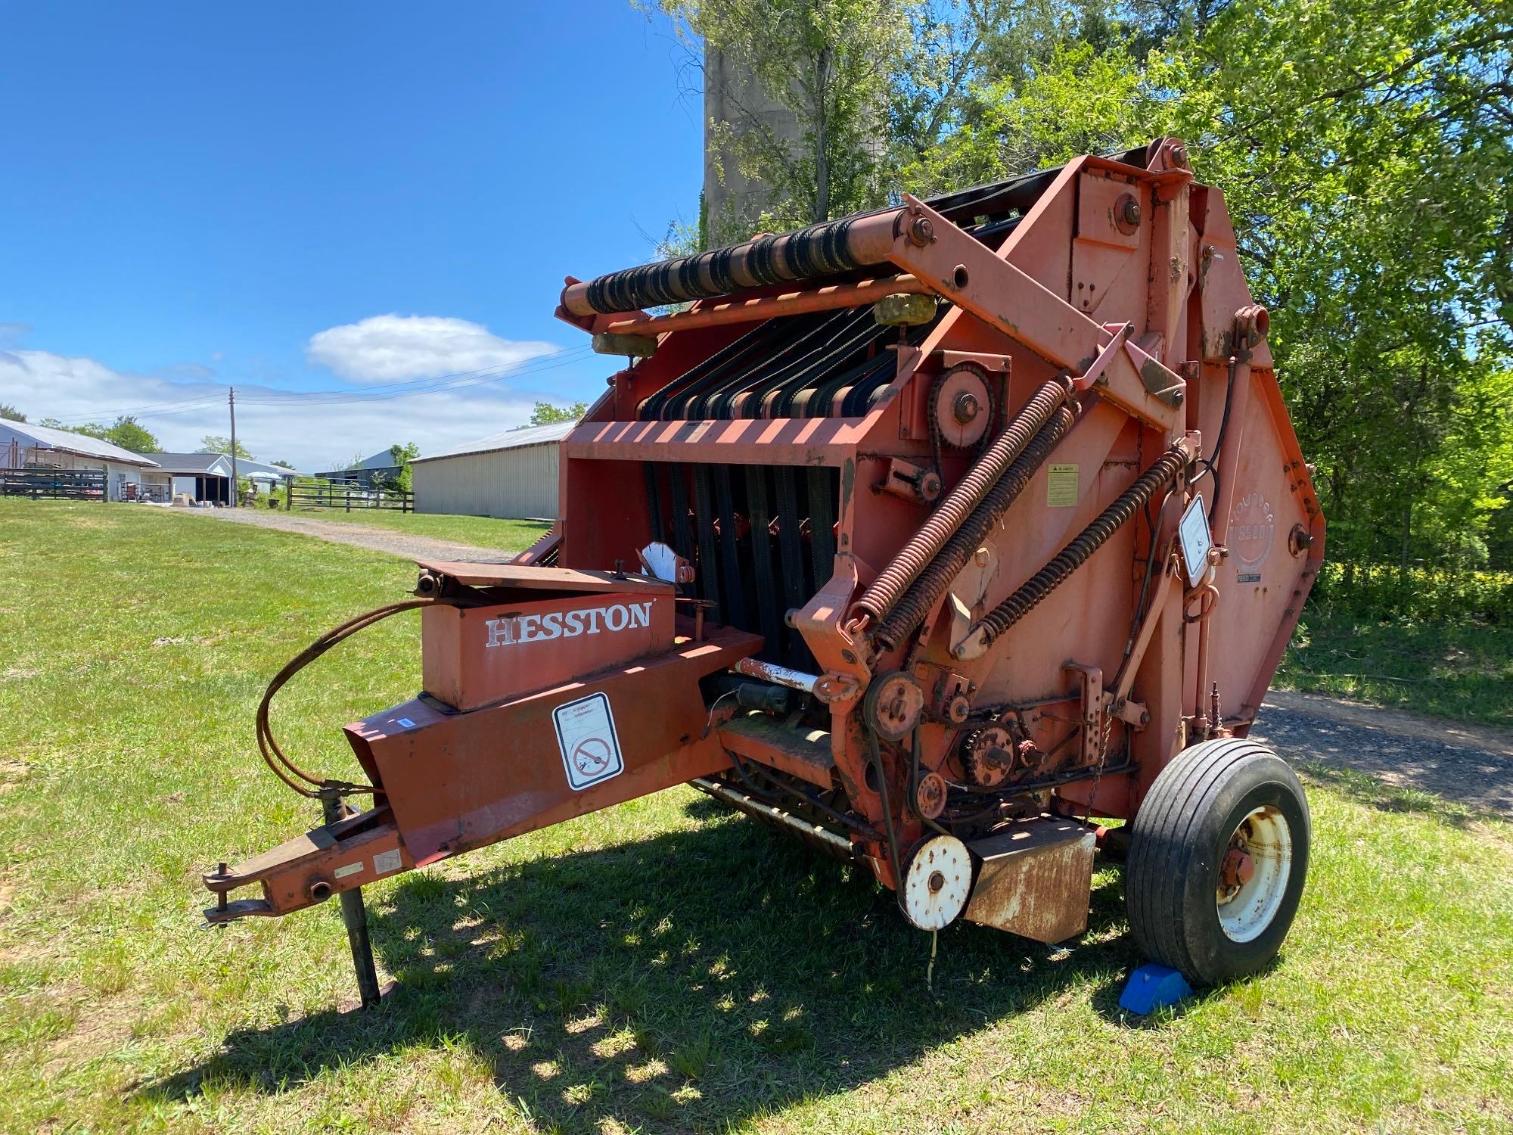 Image for Hesston Rounder 5500 Round Baler - Per Seller - needs work to be field ready